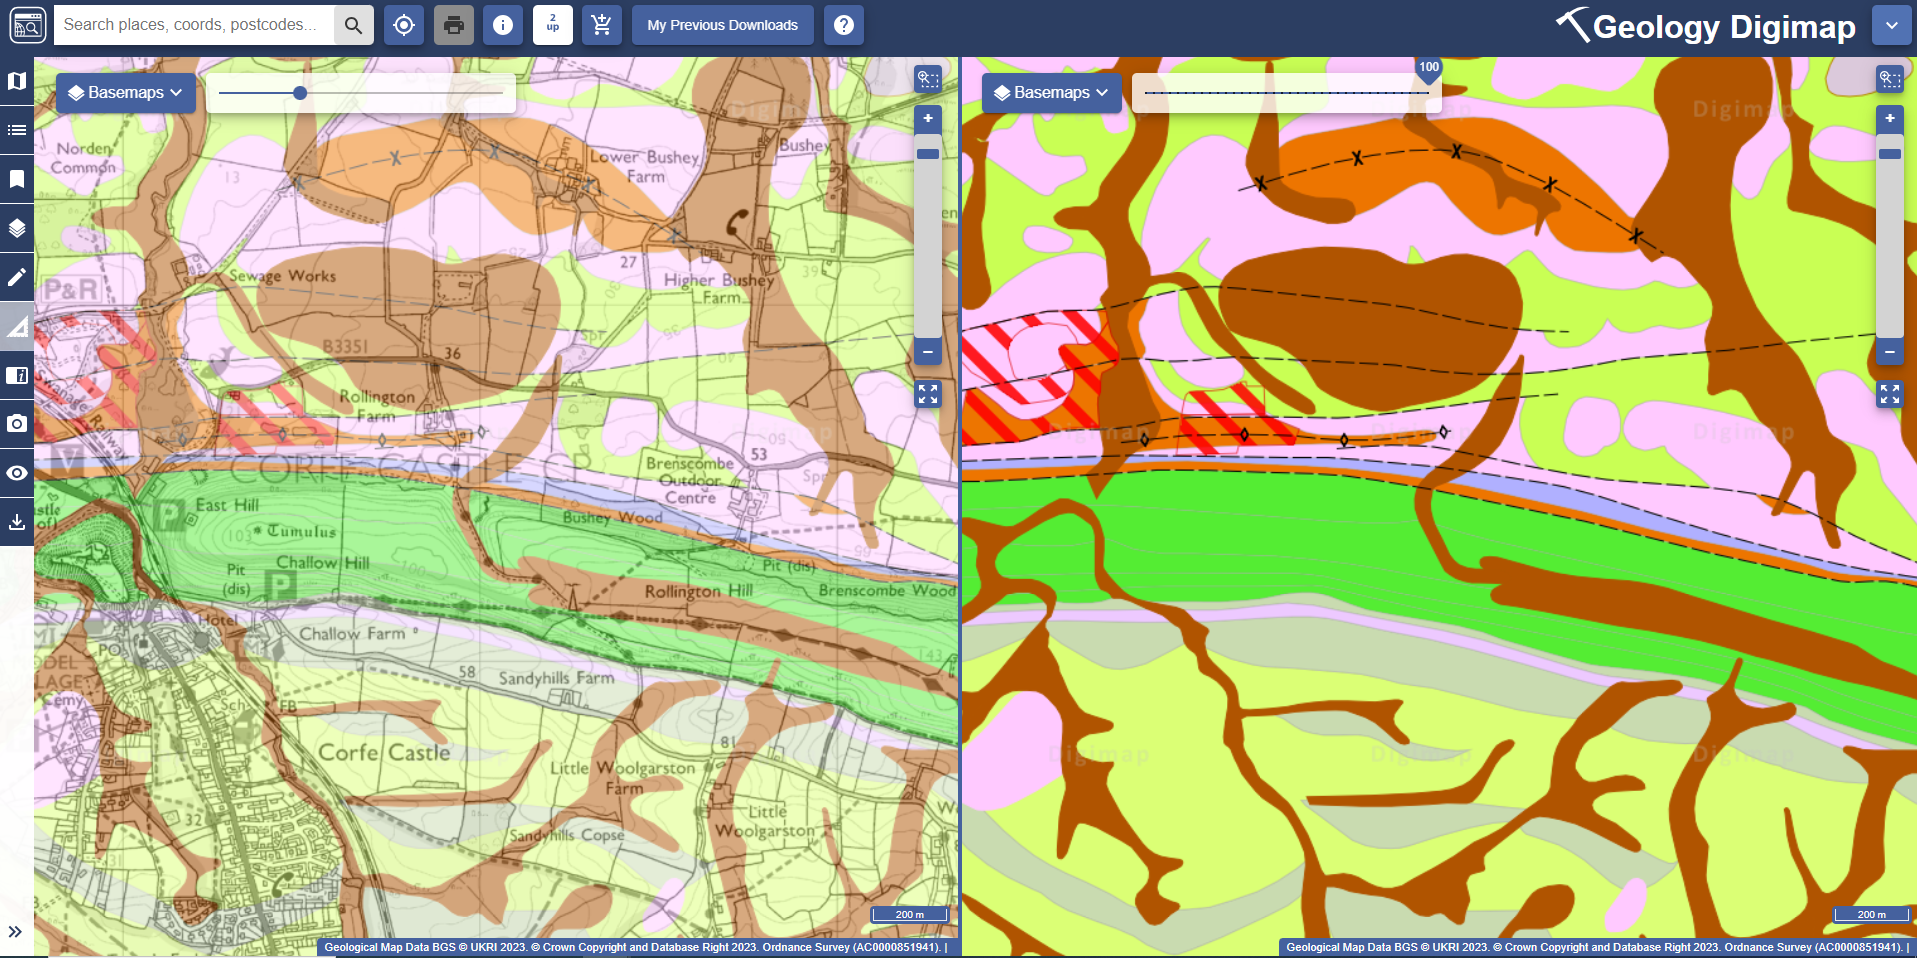 comparison of two geological maps with different opacity